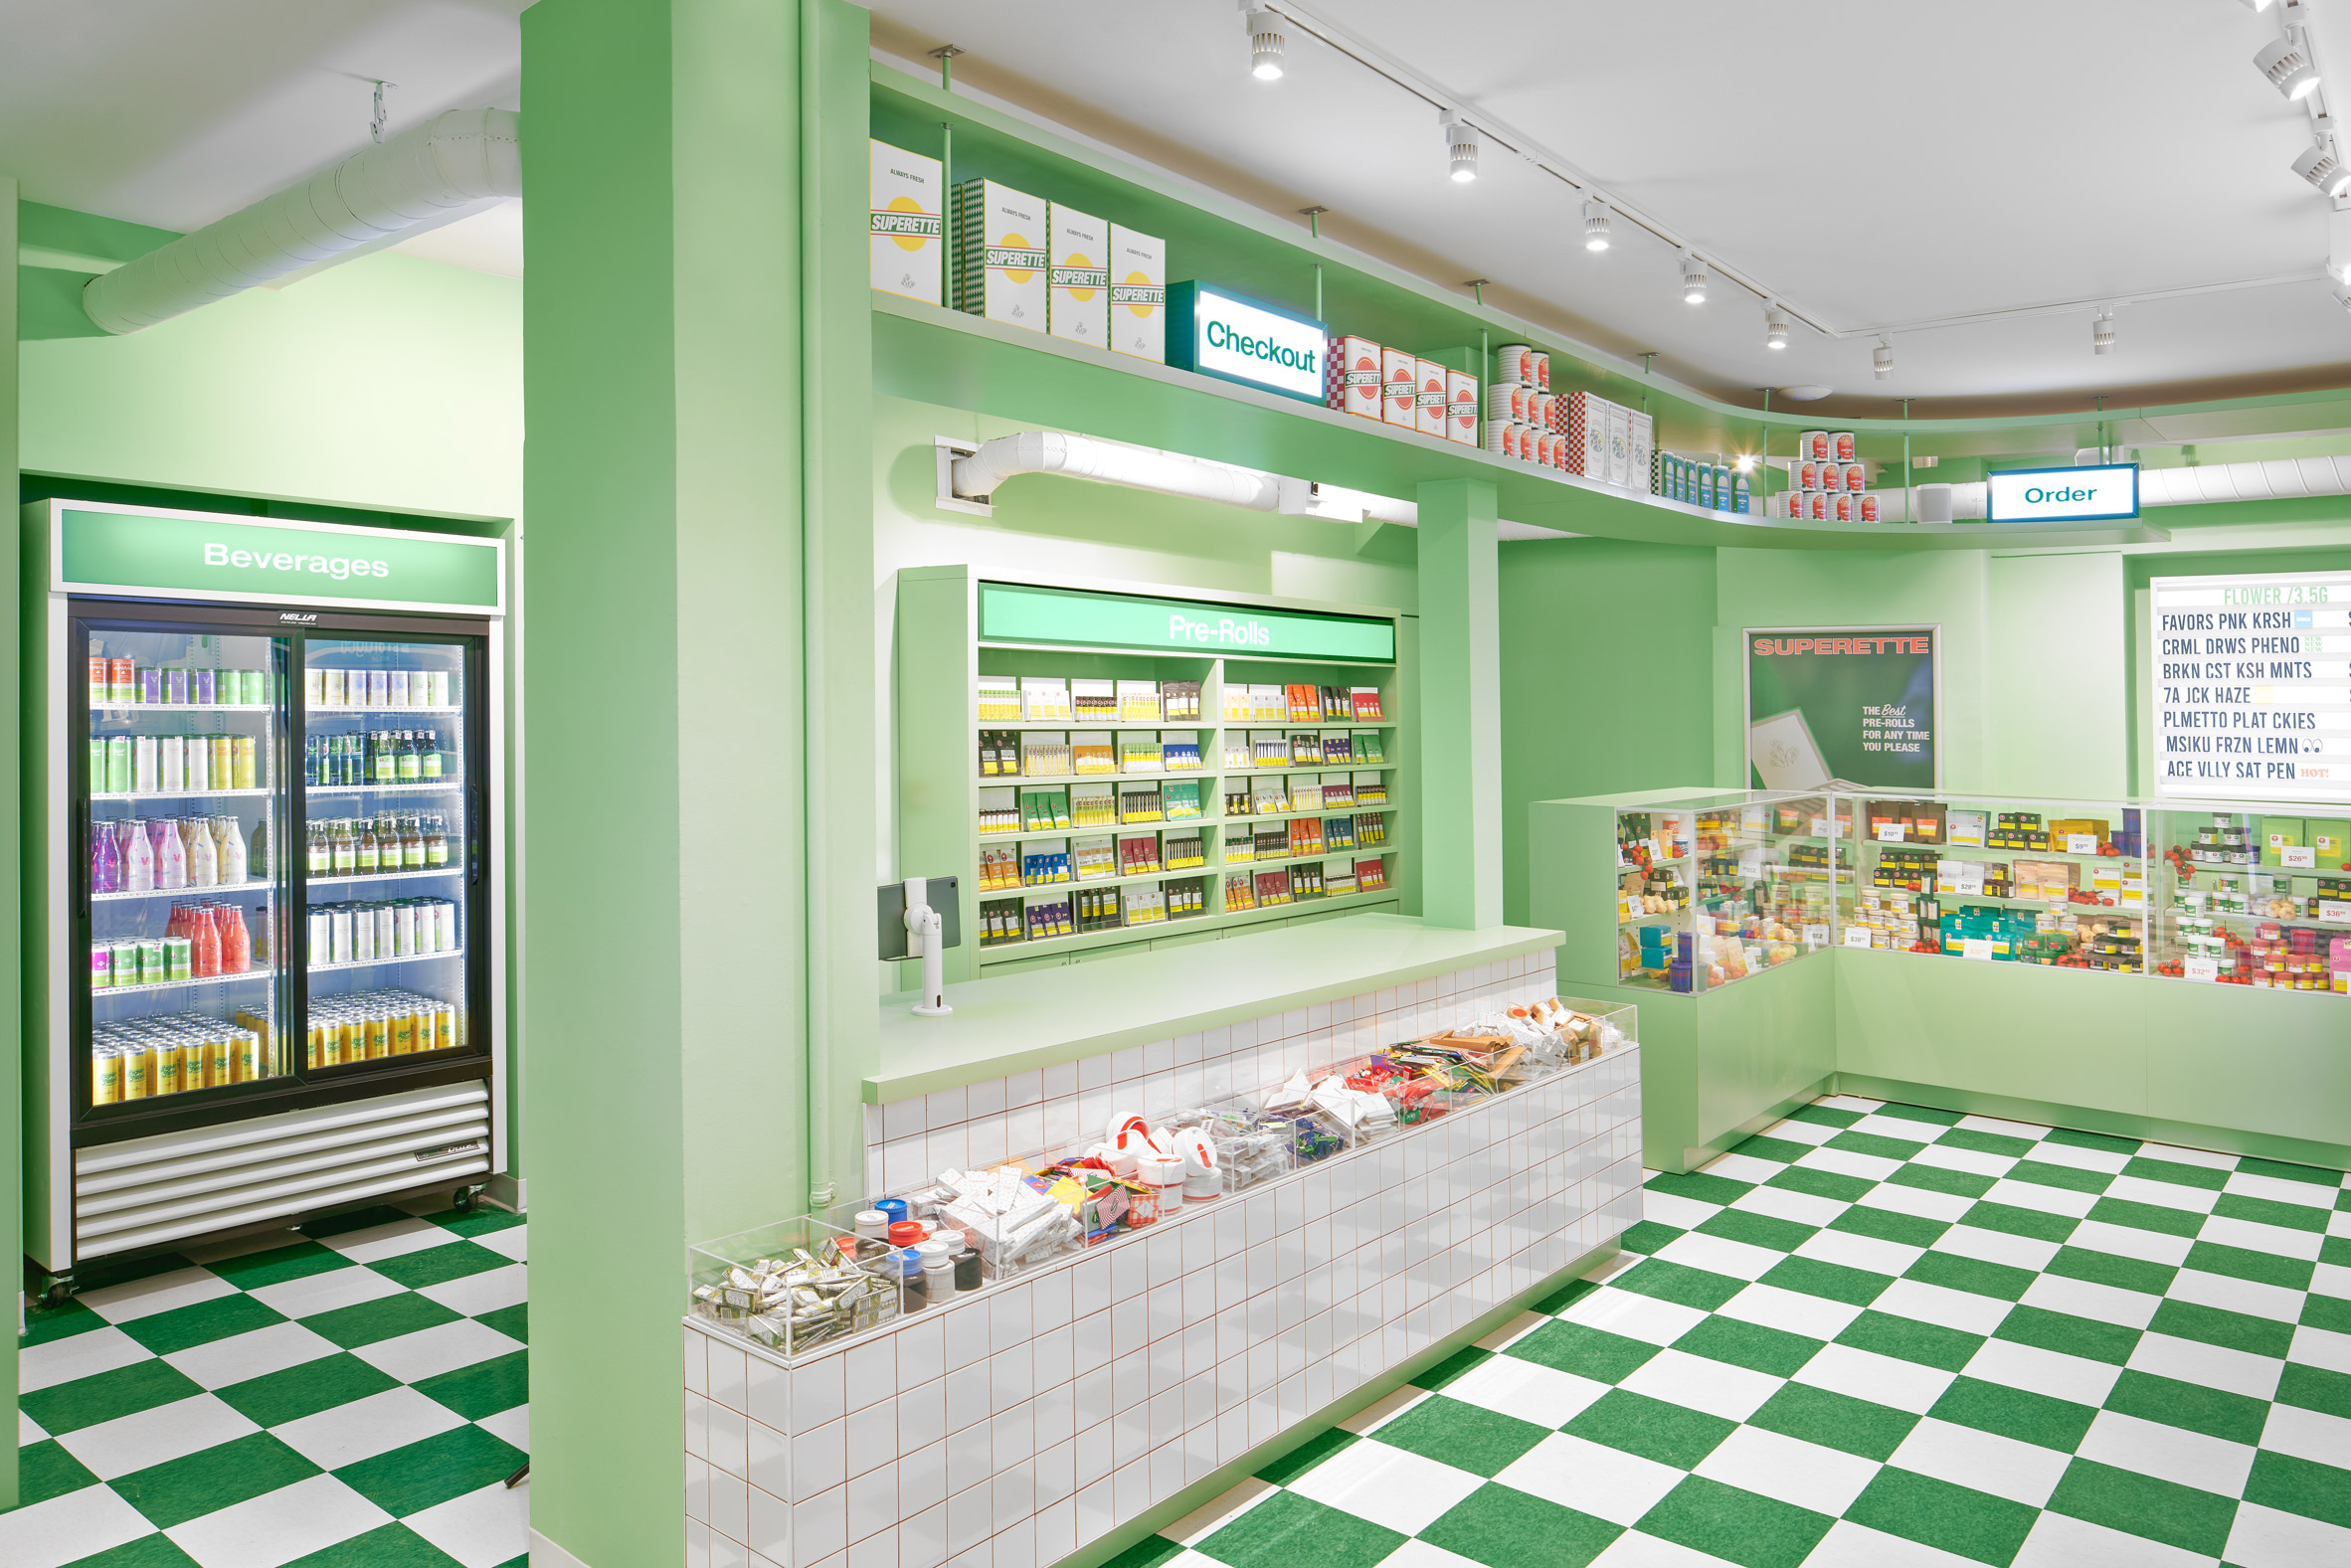 A greent store with cannabis products